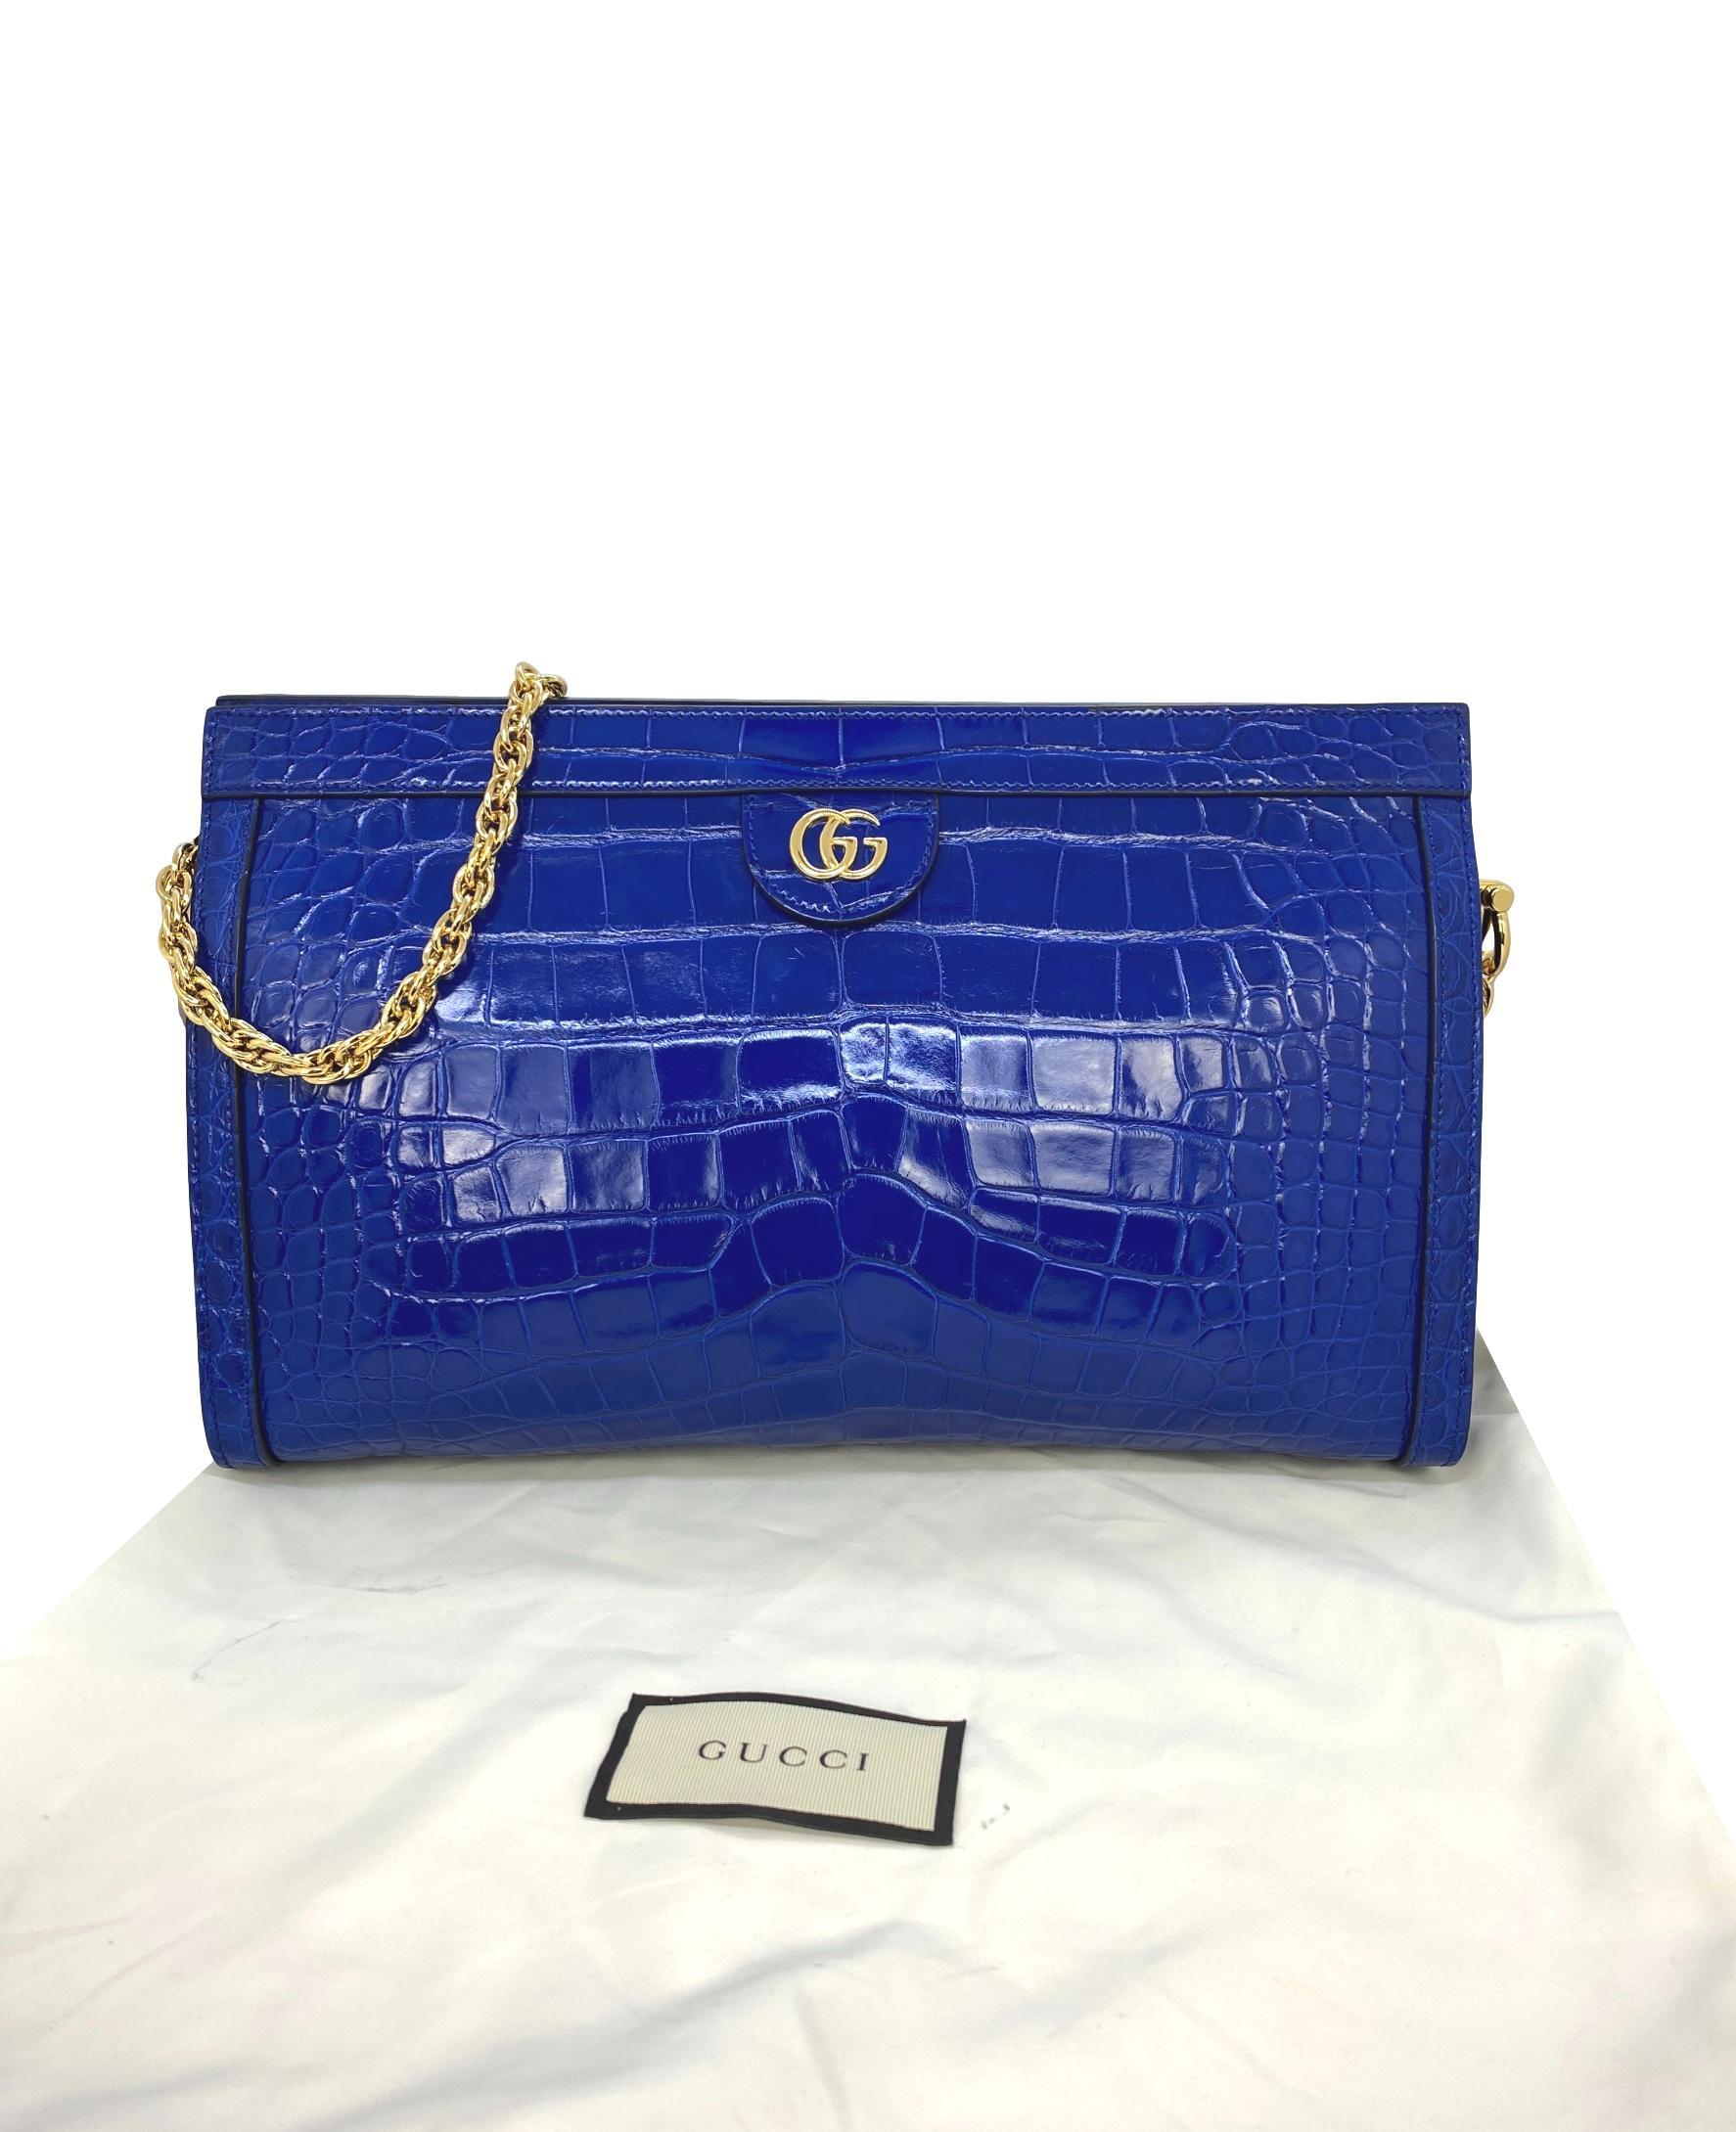 Rare Gucci Cobalt Ophidia Crocodile Shoulder Crossbody Bag, 2019. First introduced in the 2018 Cruise Line by the iconic fashion house, the Ophidia debuted and has transitioned over the years in materials, style and function. This incredible and